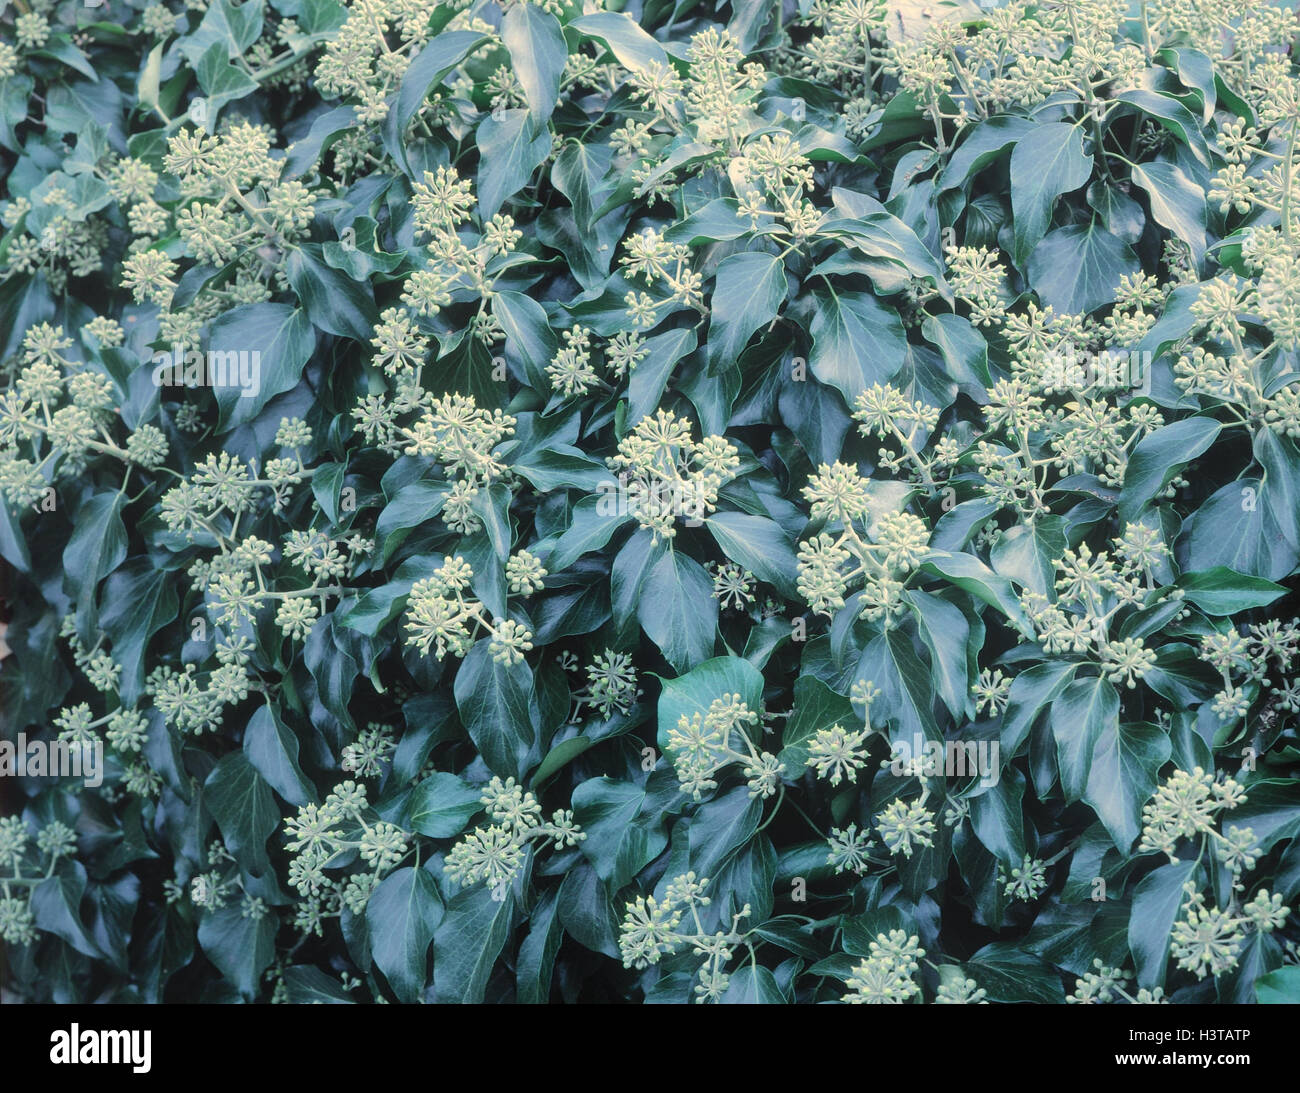 Ivy, Hedera helix plant, climbing plant, Hedera, Araliengewächse, blossom, blossoms, close up Stock Photo